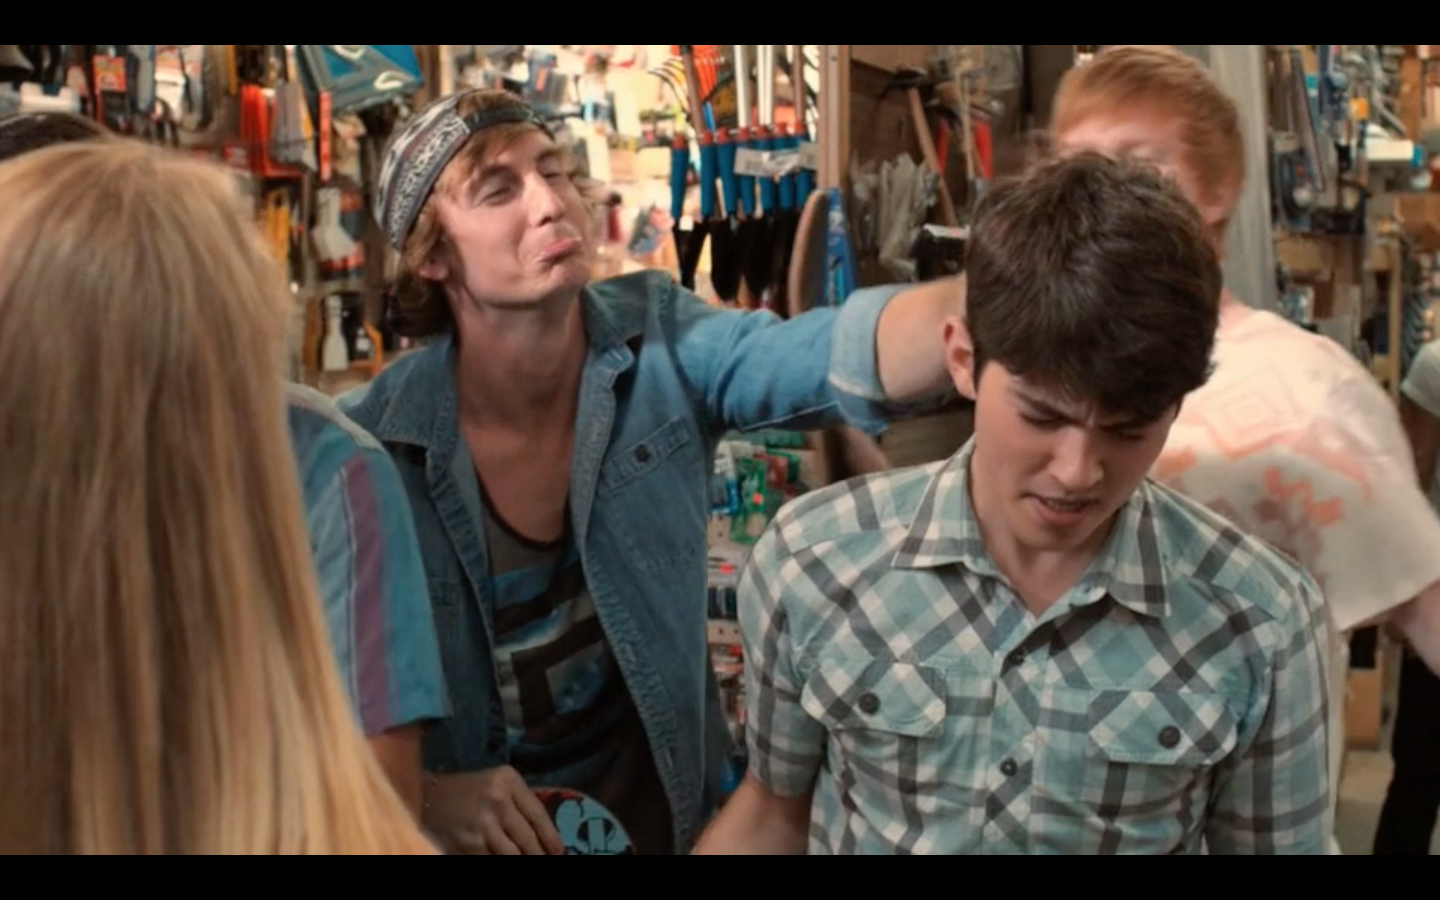 Chad with Ian Nelson in The Boy Next Door